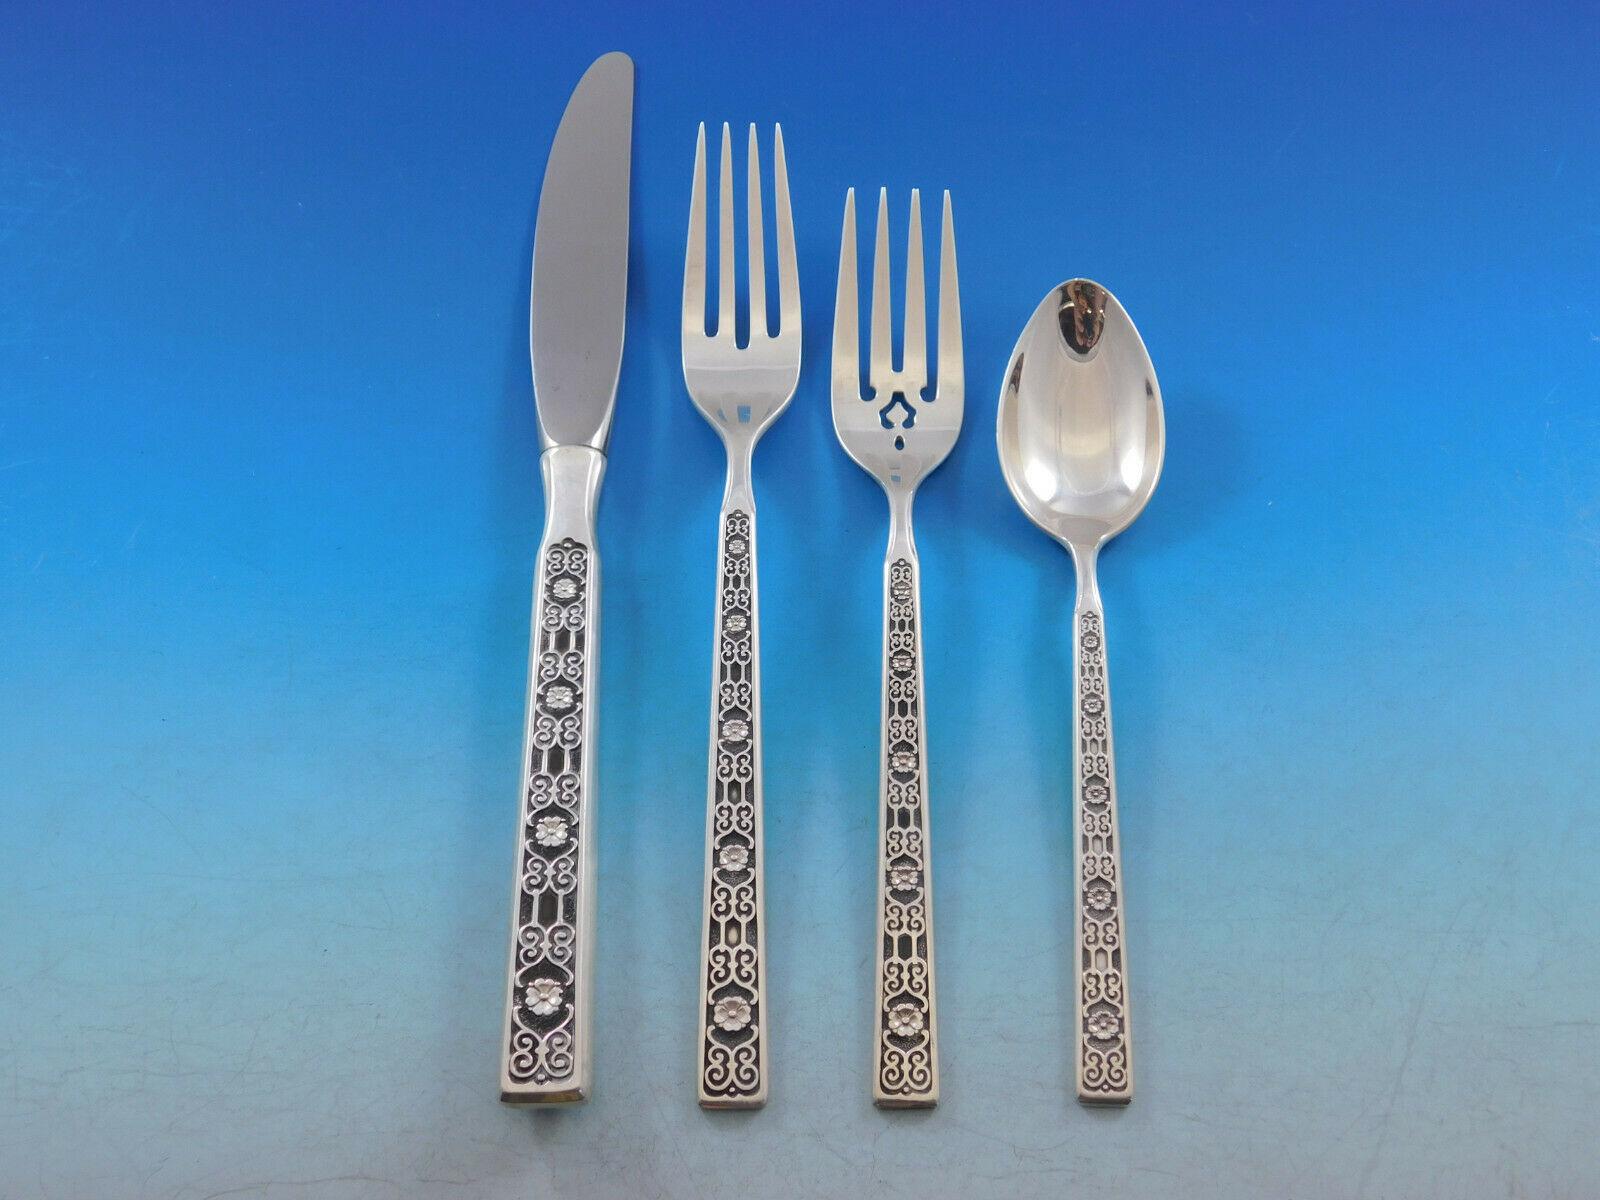 Spanish Tracery by Gorham sterling silver flatware set - 80 pieces. This set includes:
12 Knives, 9